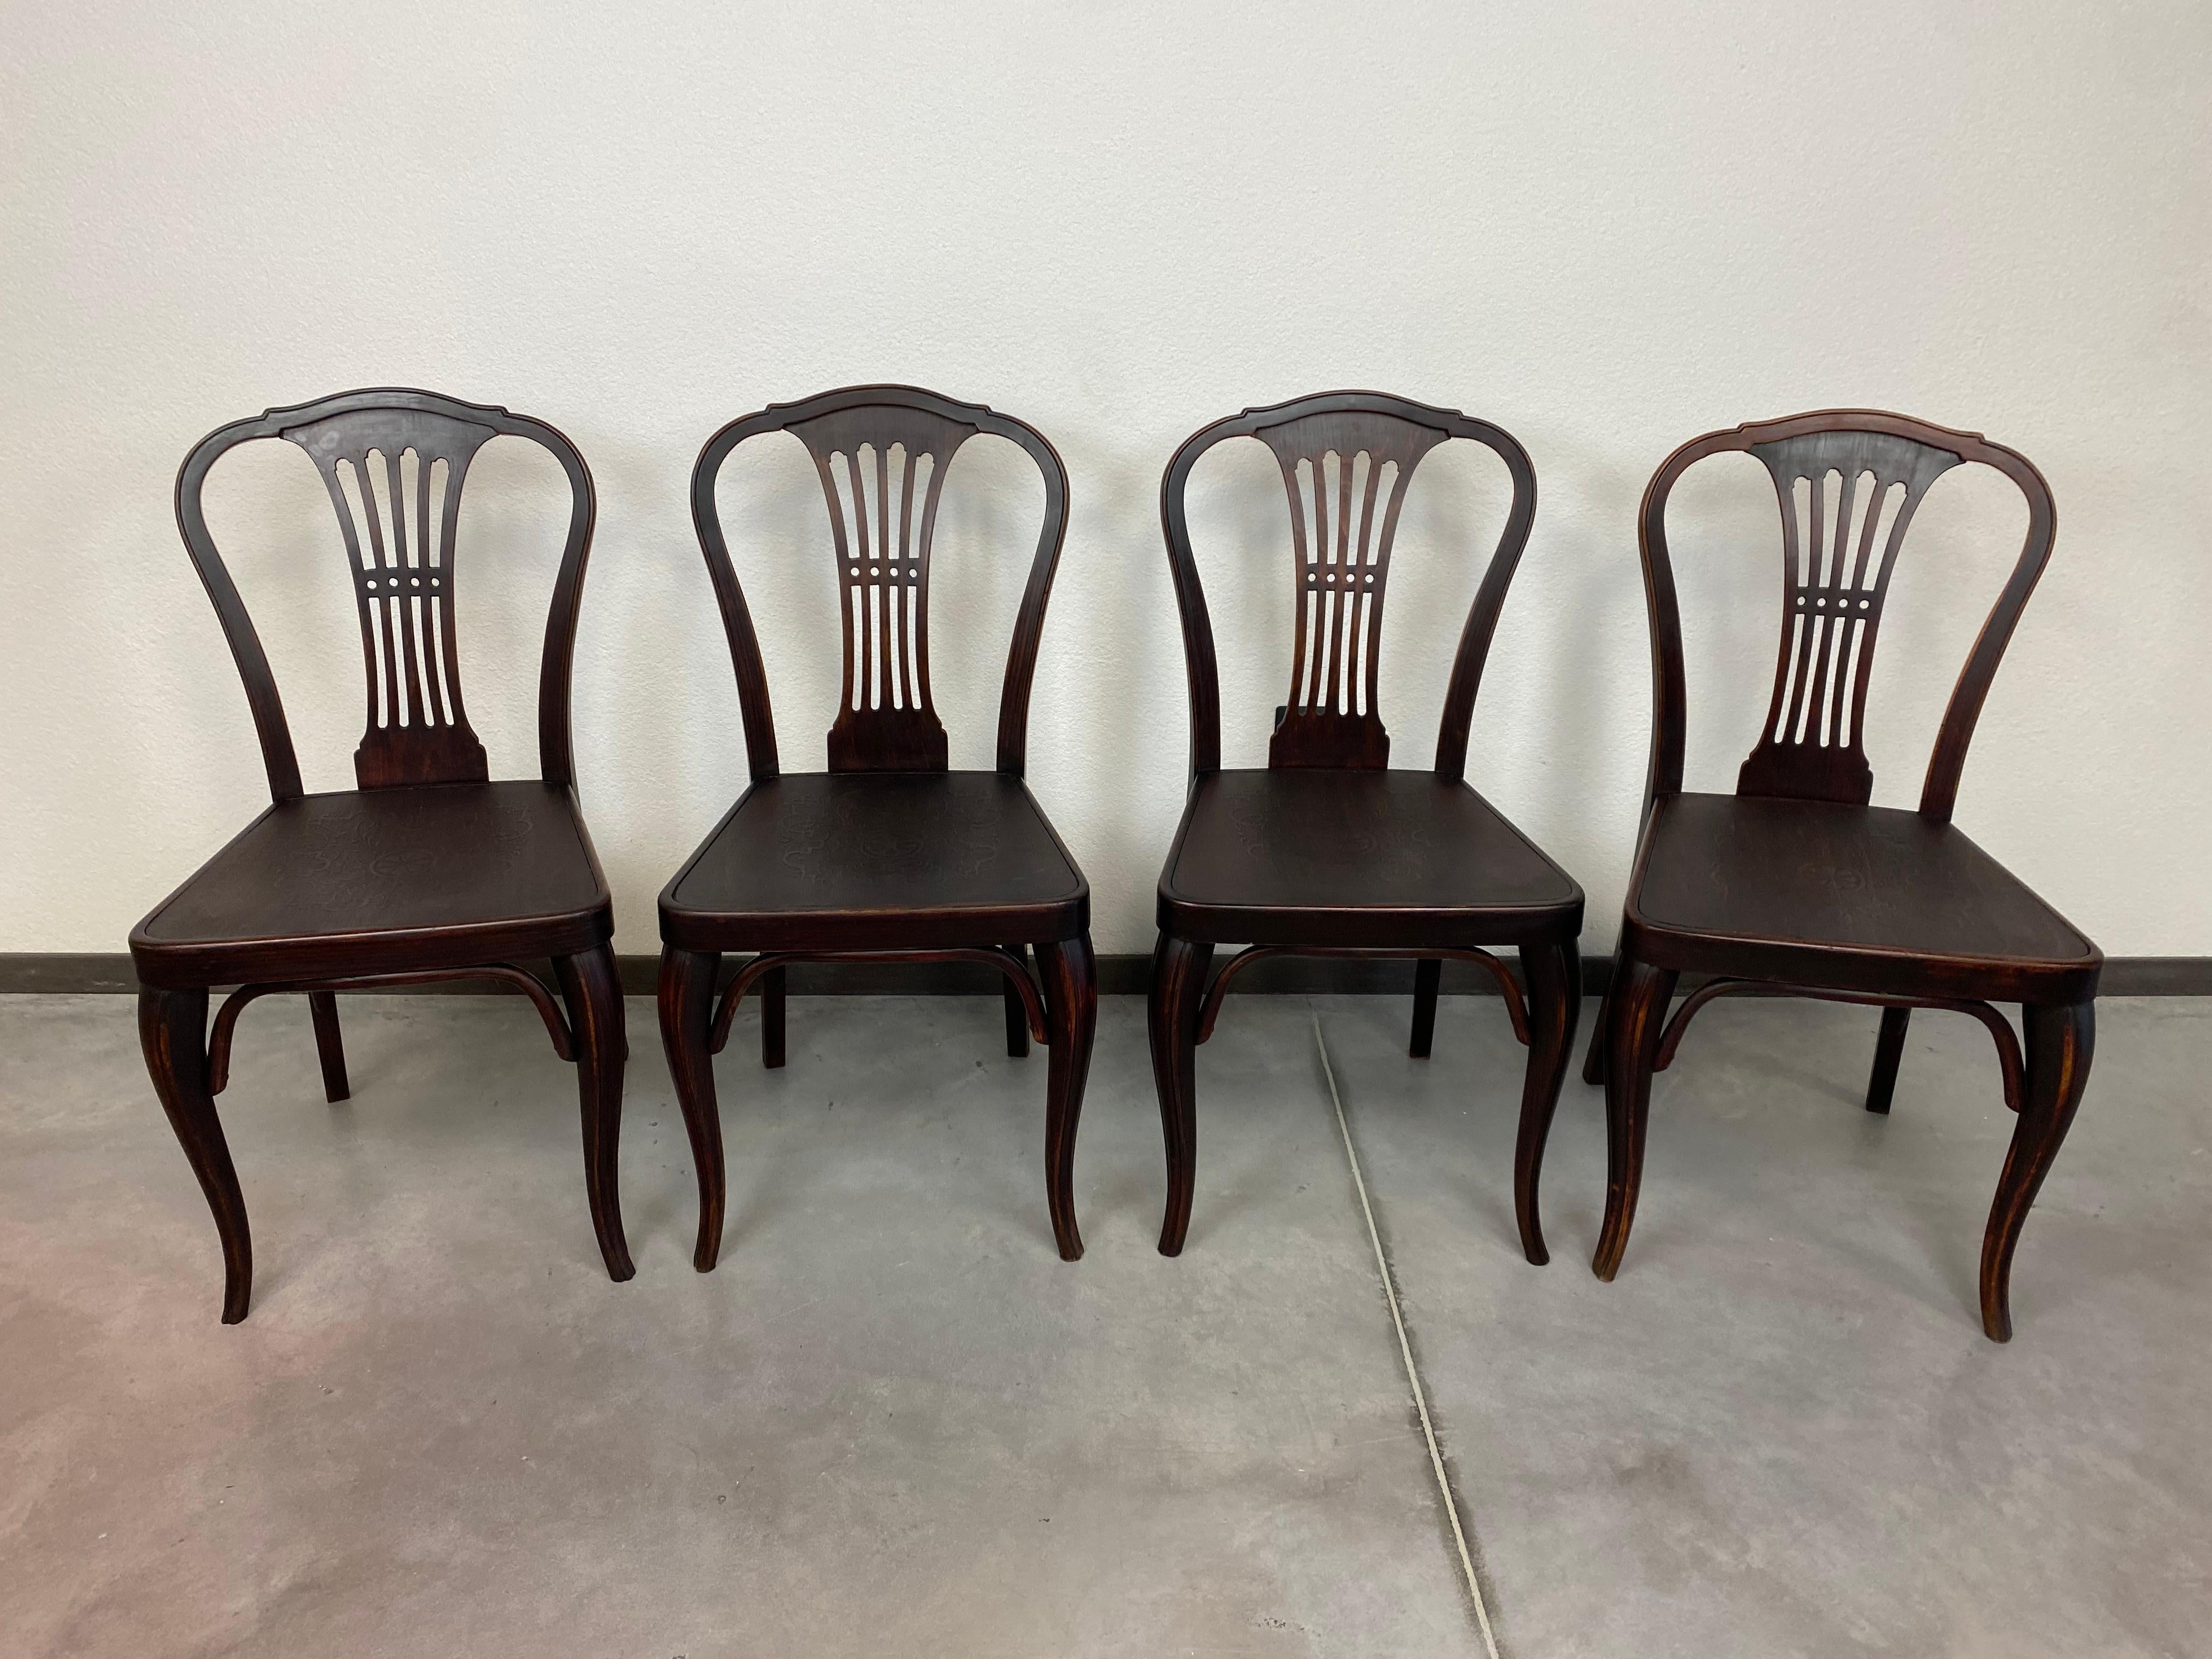 Set od 4 dining chairs no.613 by Gustav Siegel for Thonet professionally stained and repolished.